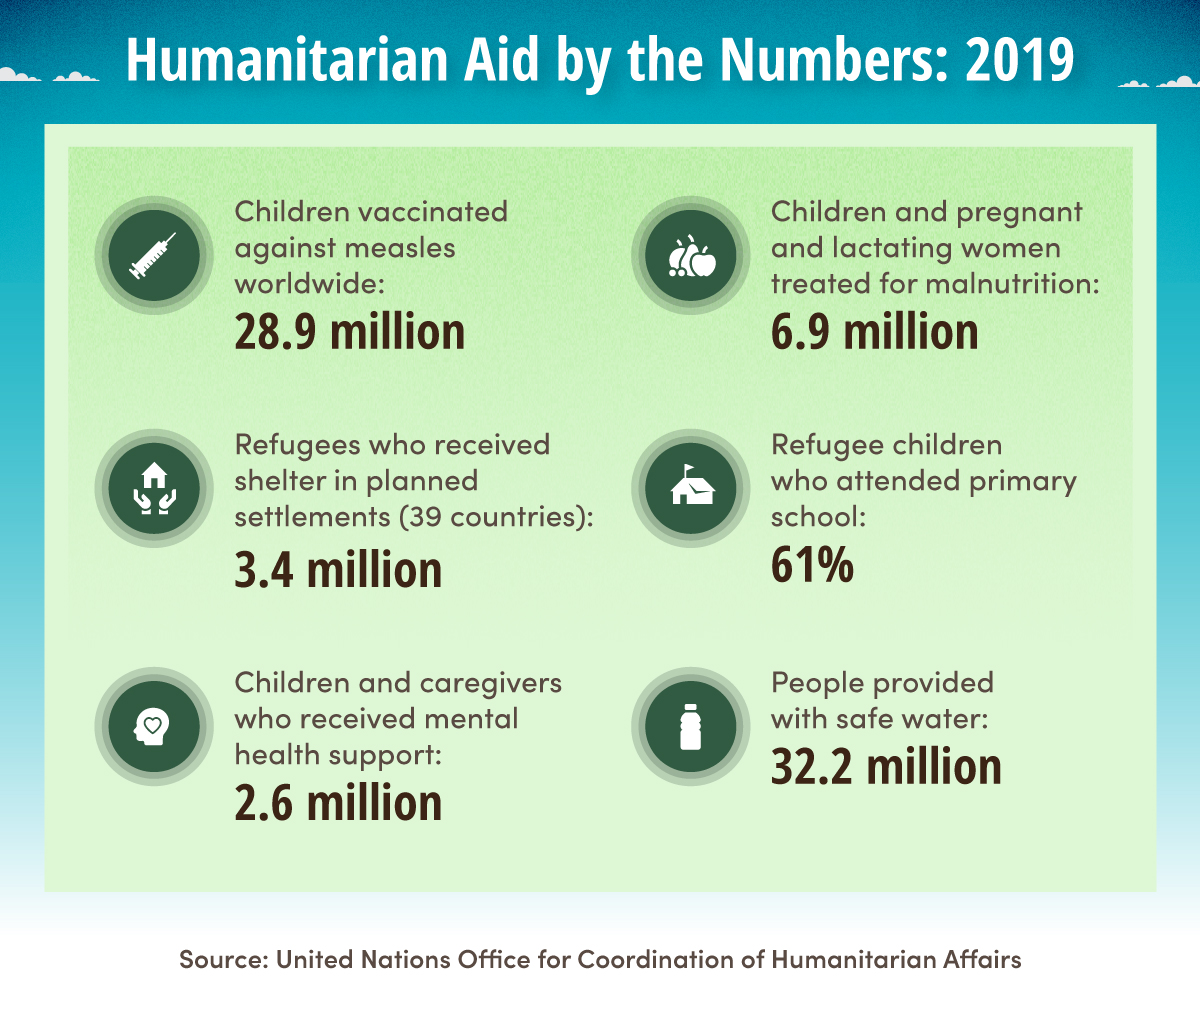 Humanitarian aid by the numbers 